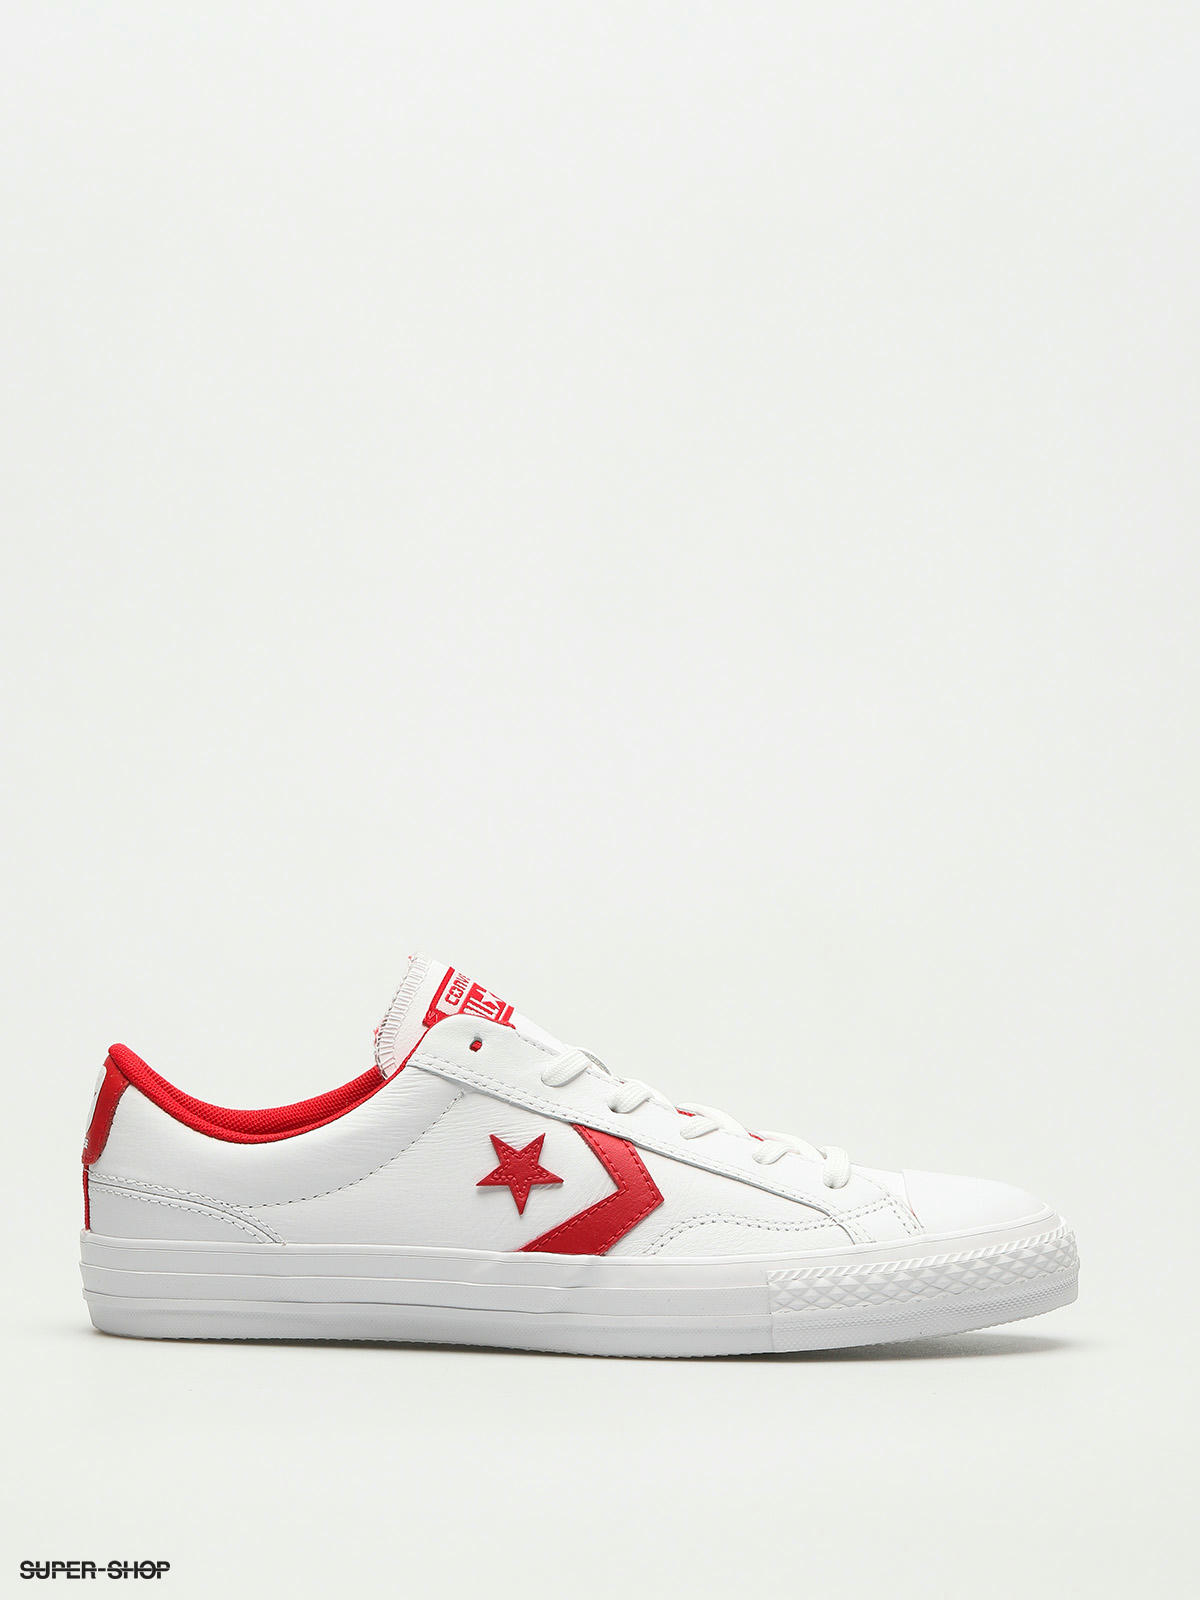 converse star player ox white leather